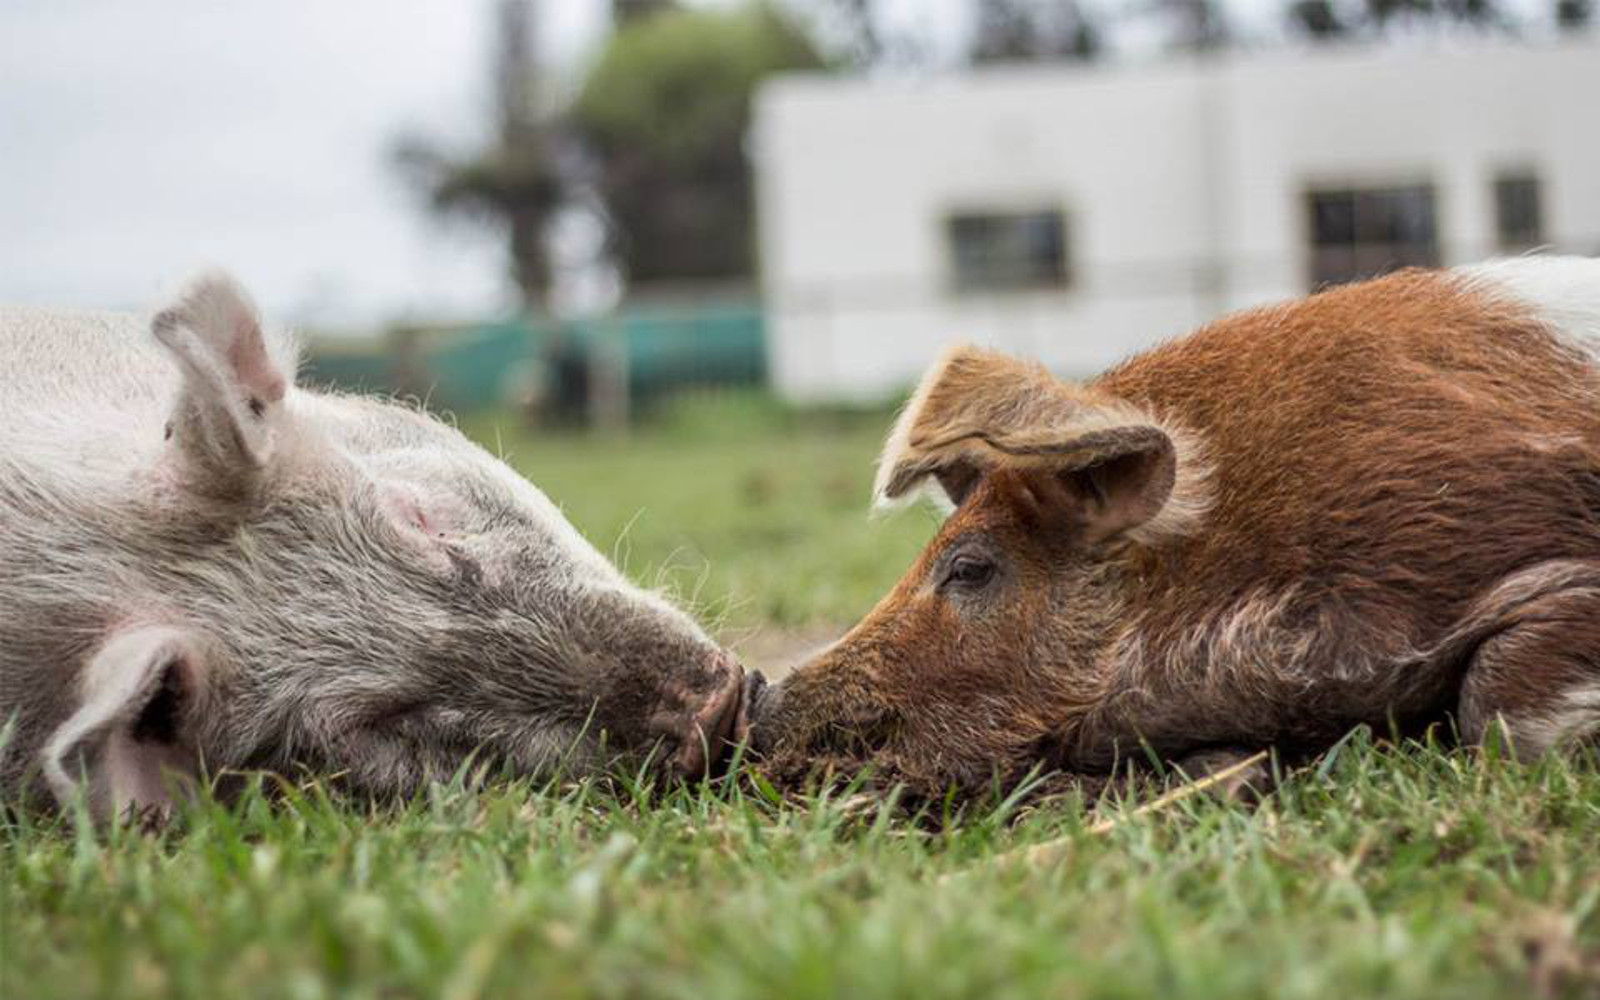 Two Rescues Pigs Share an Intimate Moment, Showing There's Much More to These Animals Than We Think